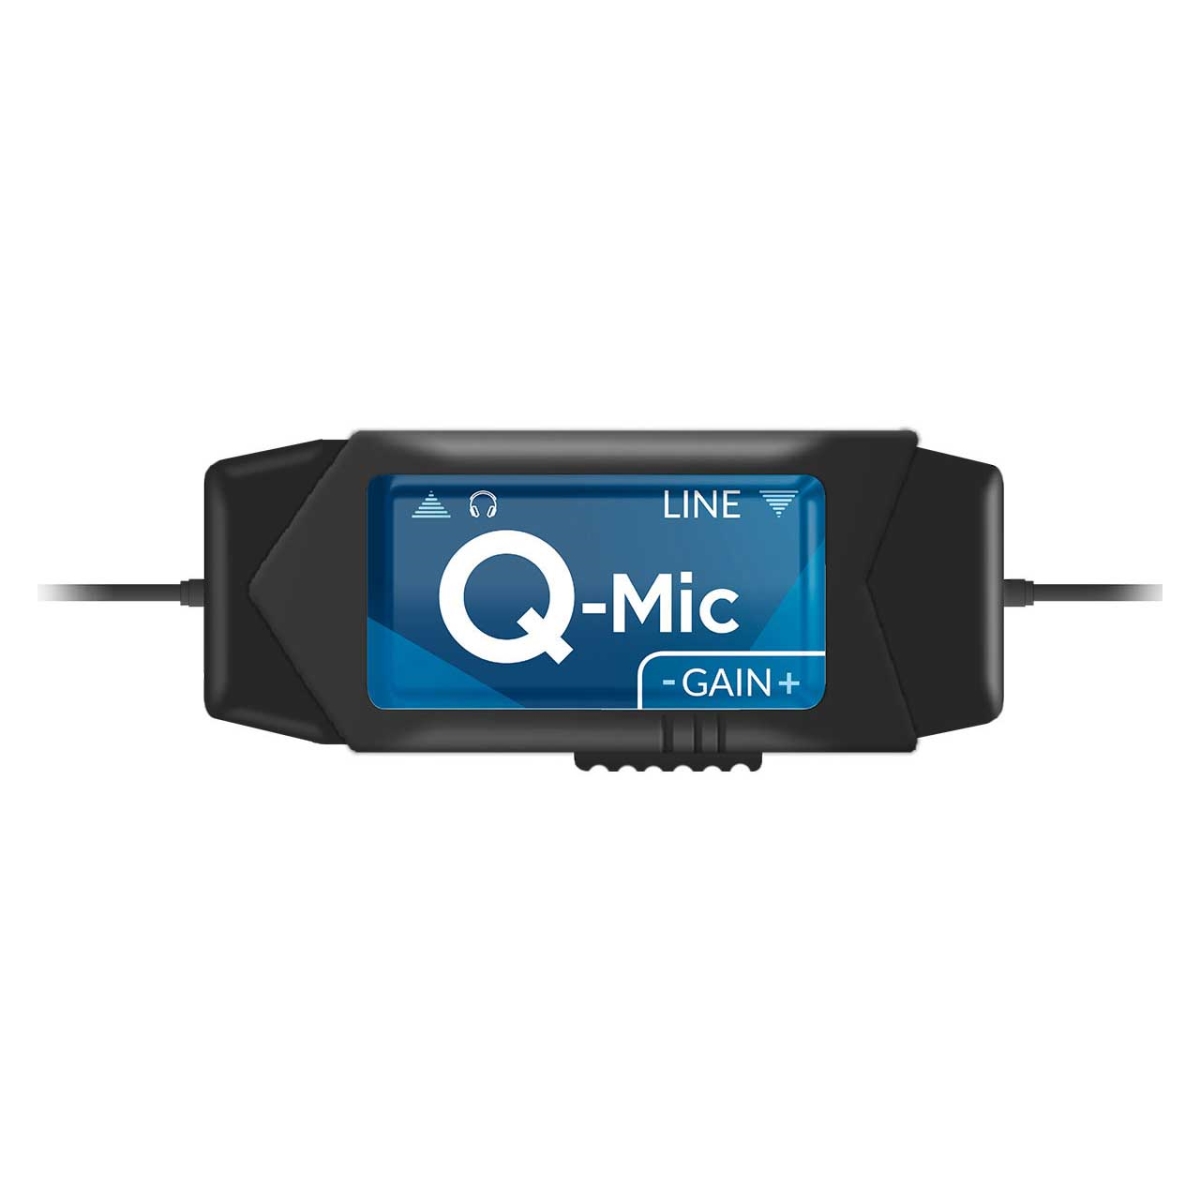 Picture of Digigram DGR-QMIC Q-MIC Professional Dynamic MIC Preamp for Smartphones-Tablets